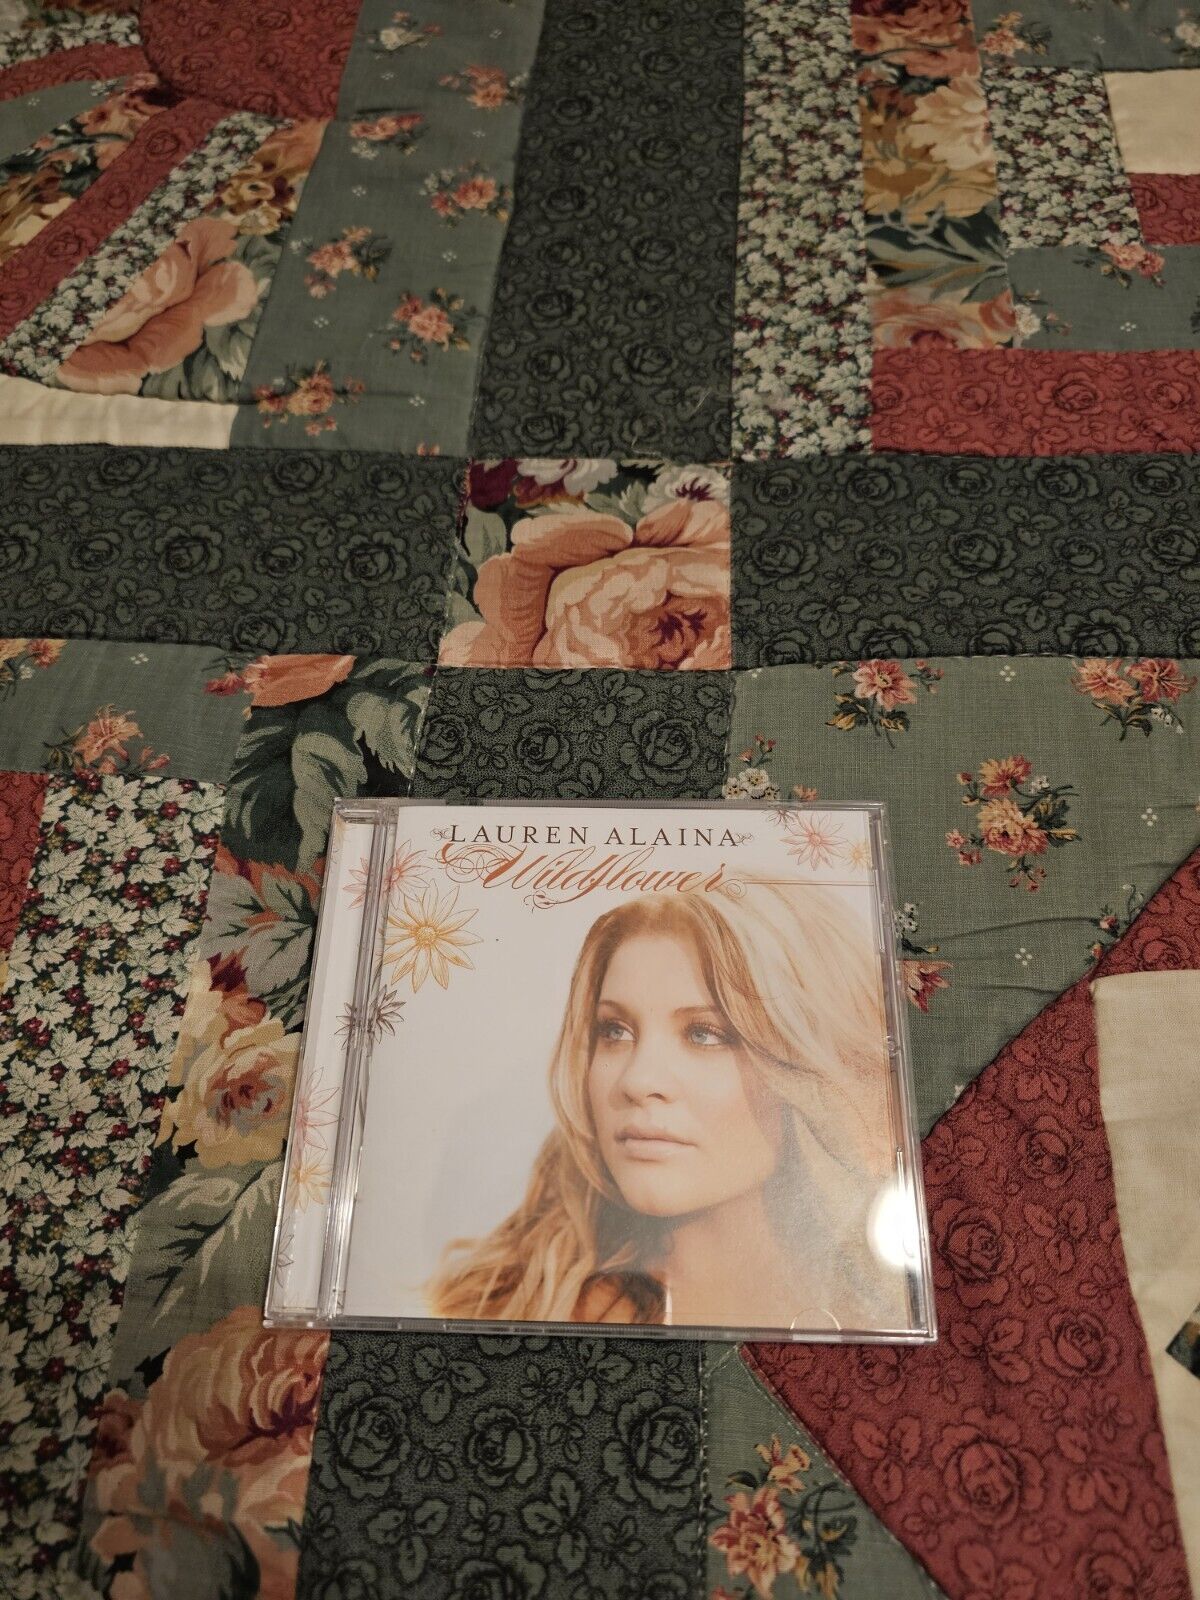 LAUREN ALAINA WILDFLOWER CD, BRAND NEW, NO SCRATCHES, PERFECT CONDITION, GRT BUY